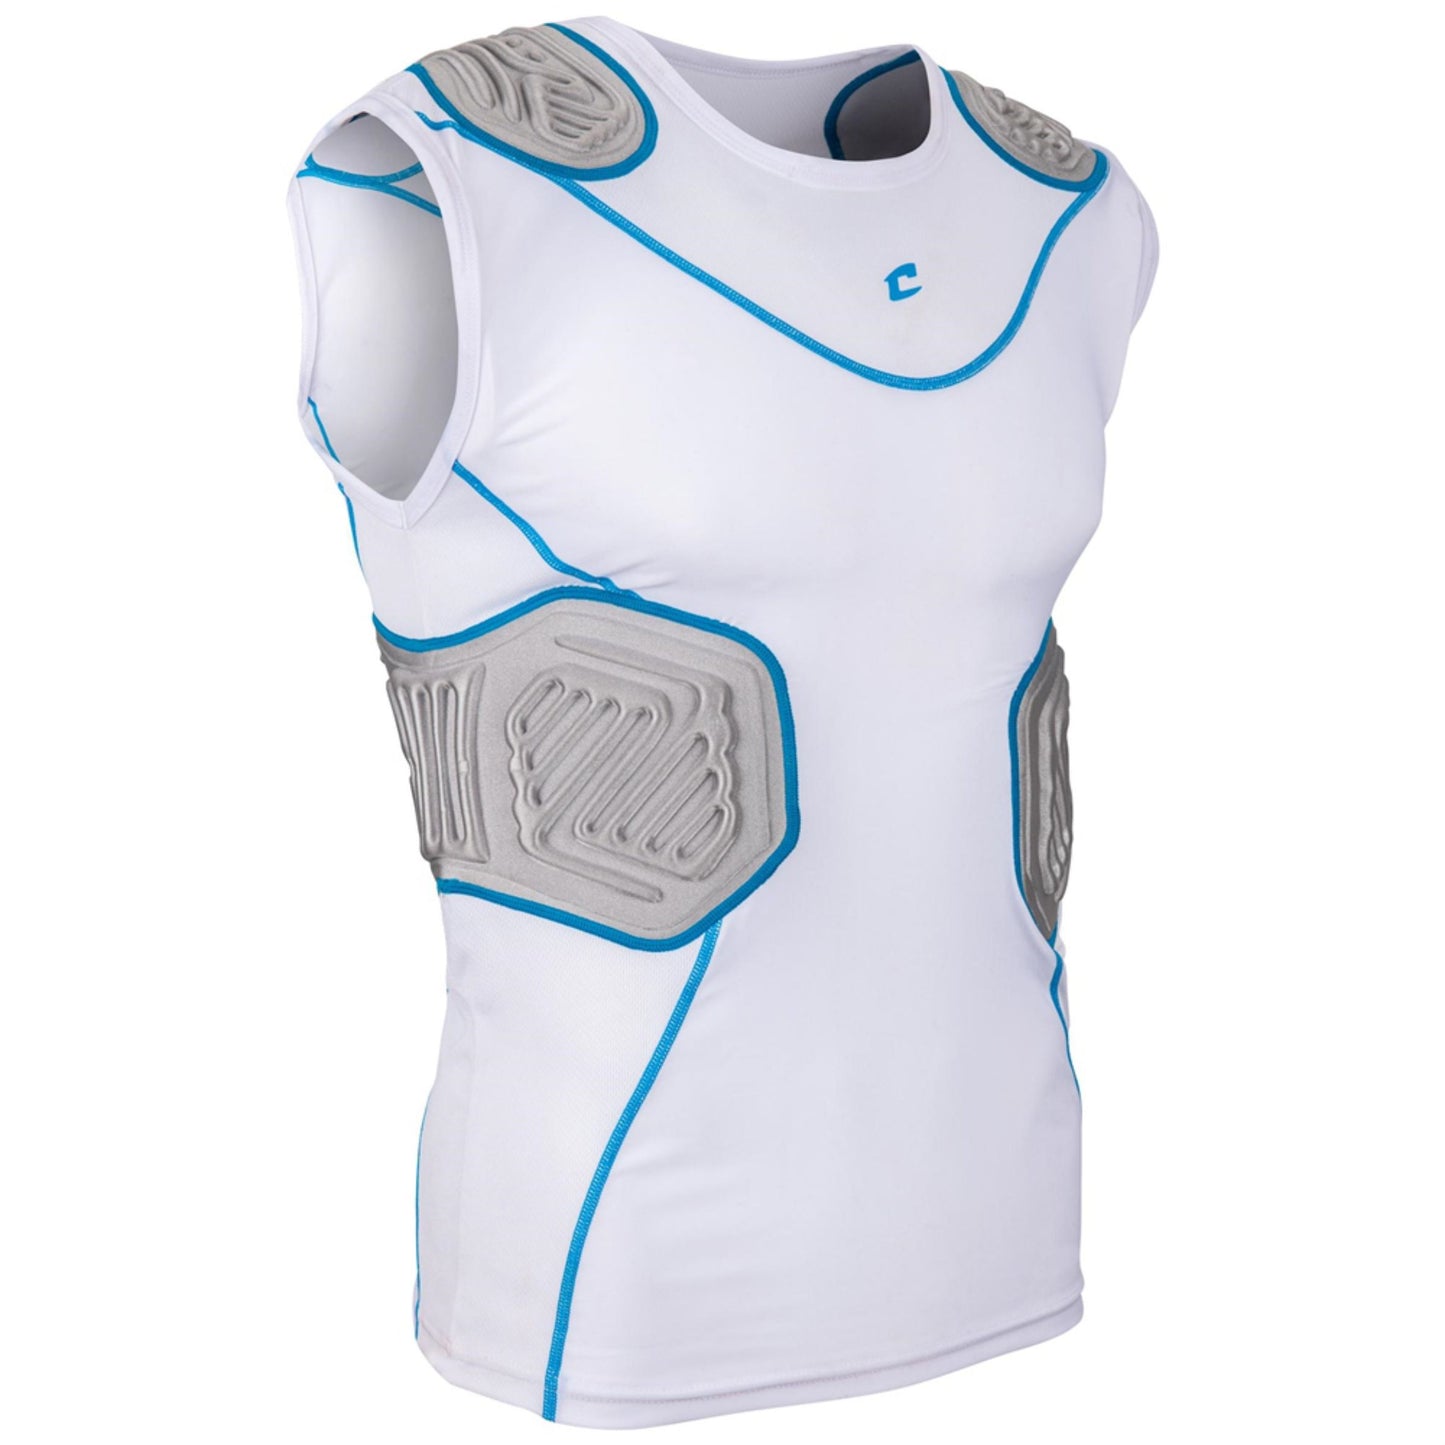 Football Compression Shirt w/ Built In Pads